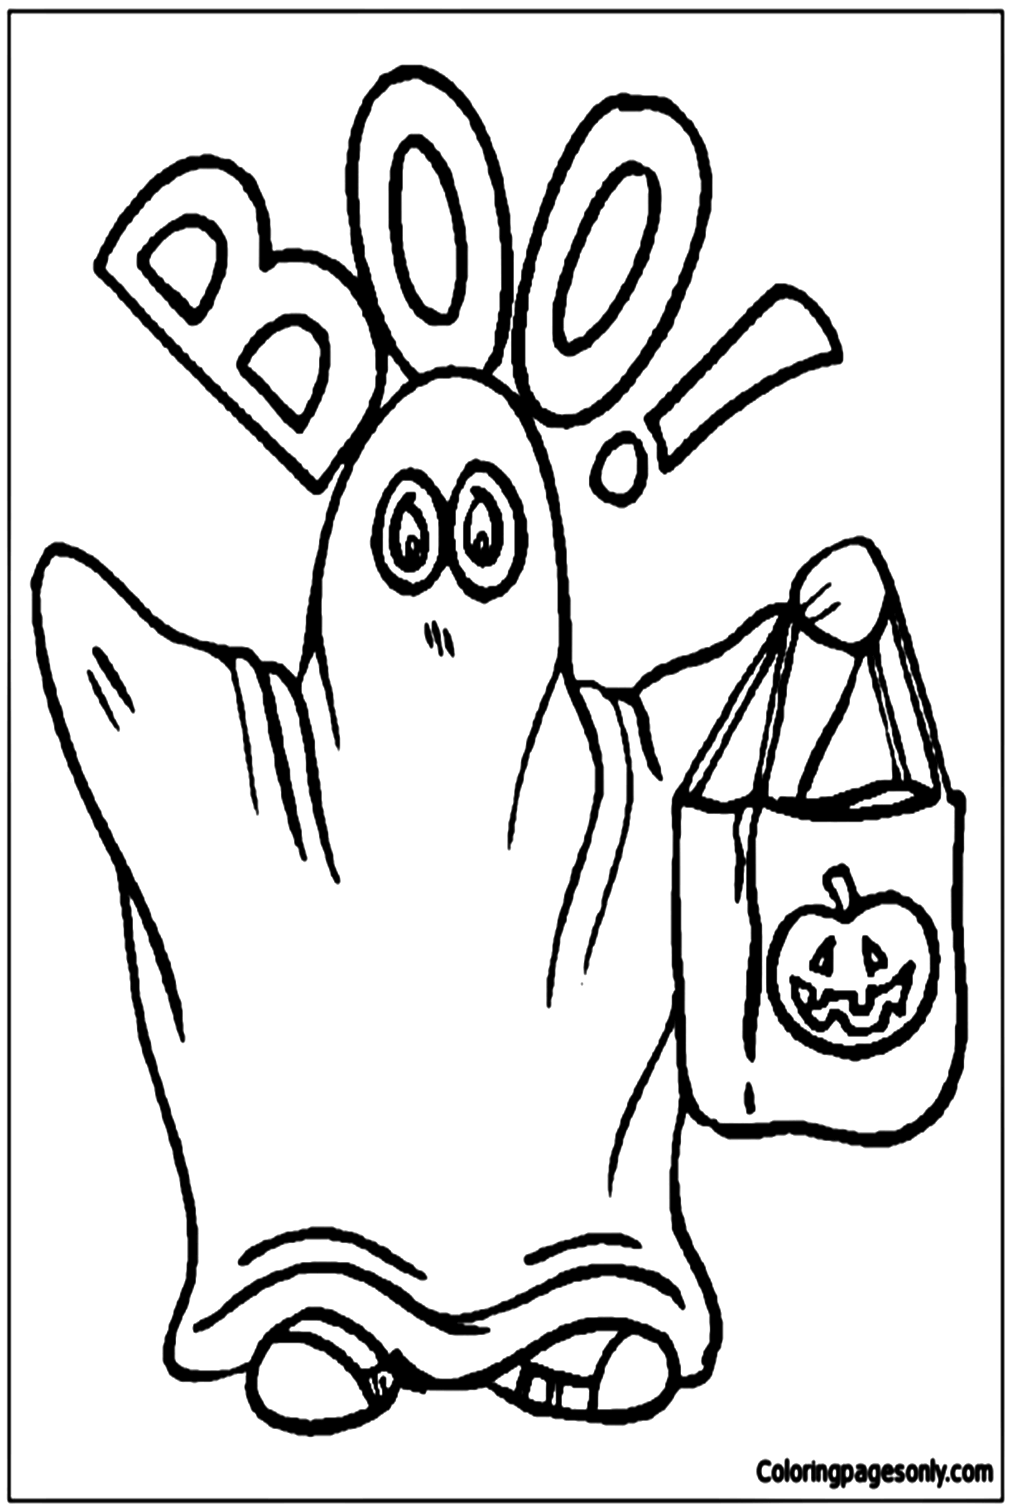 Boo Ghost Coloring Page